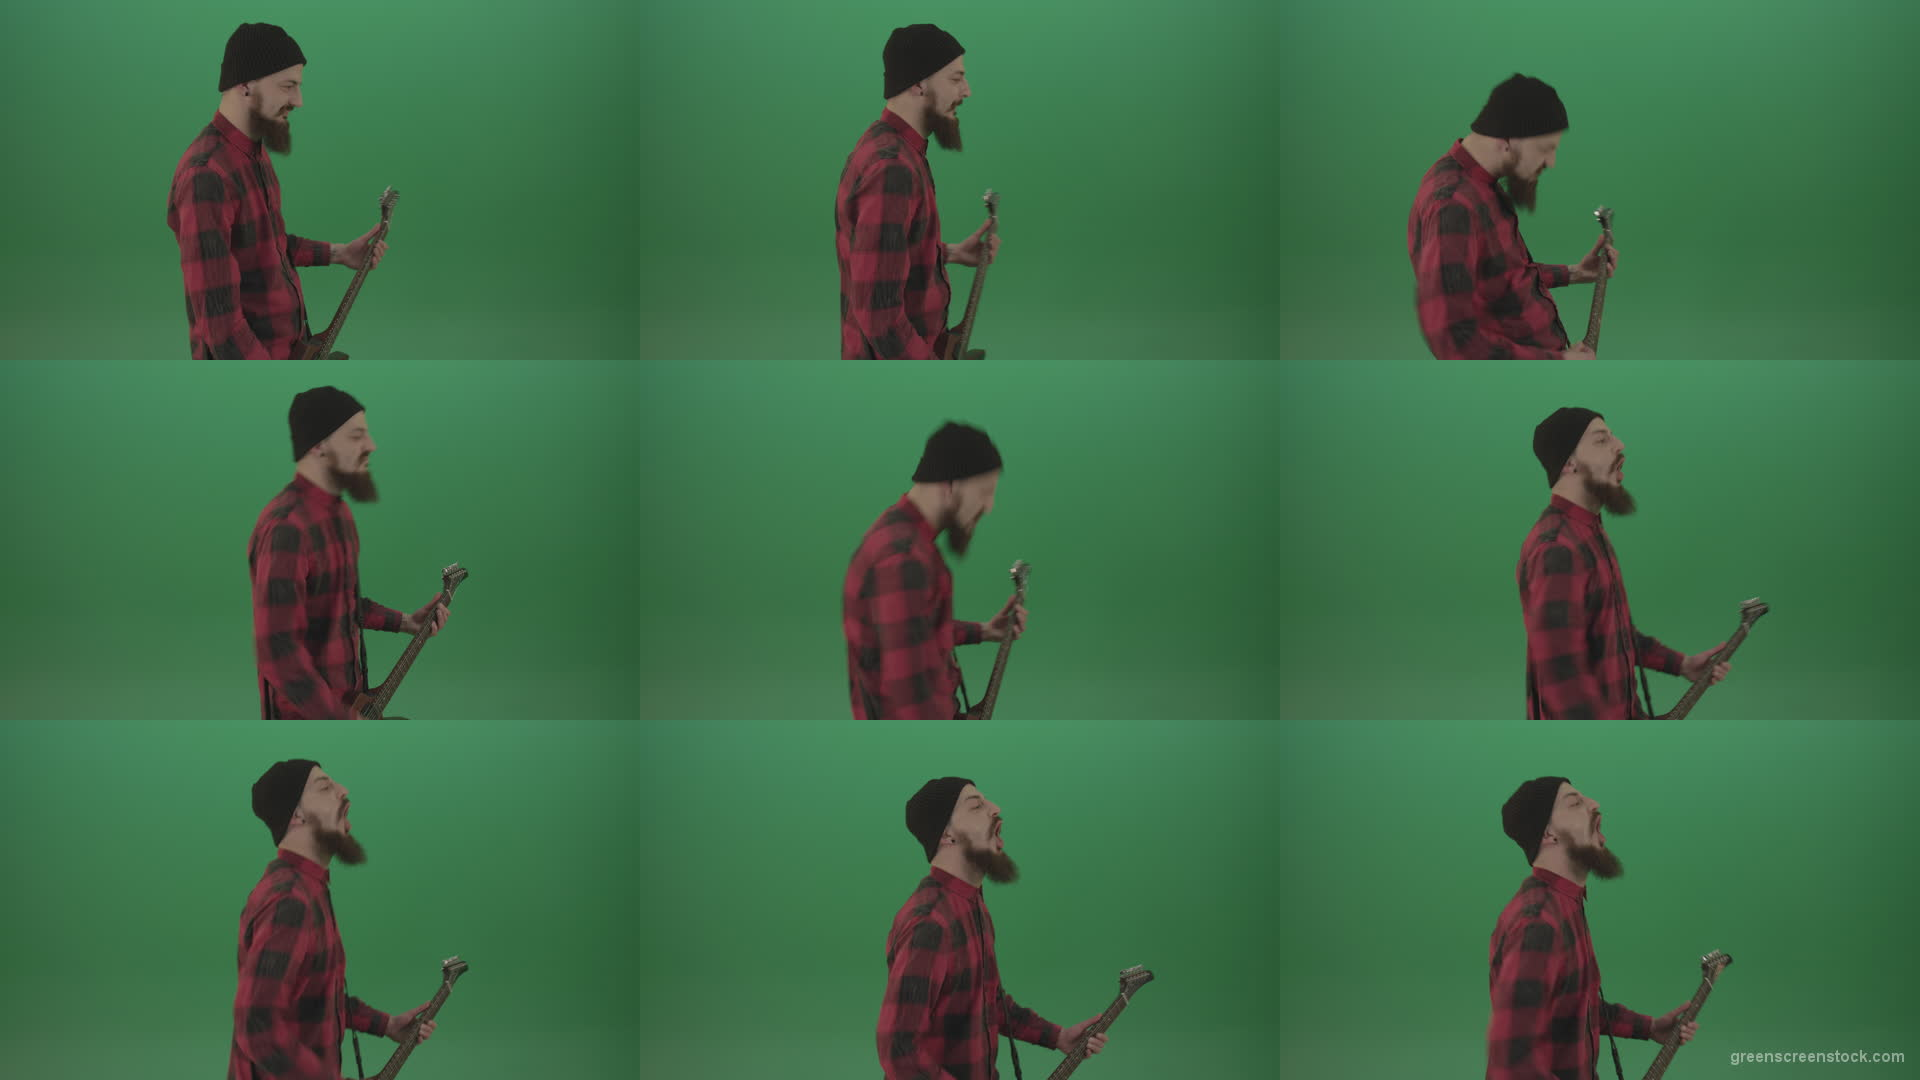 Angry-punk-rock-man-guitarist-play-guitar-and-scream-death-hardcore-music-isolated-on-green-screen Green Screen Stock